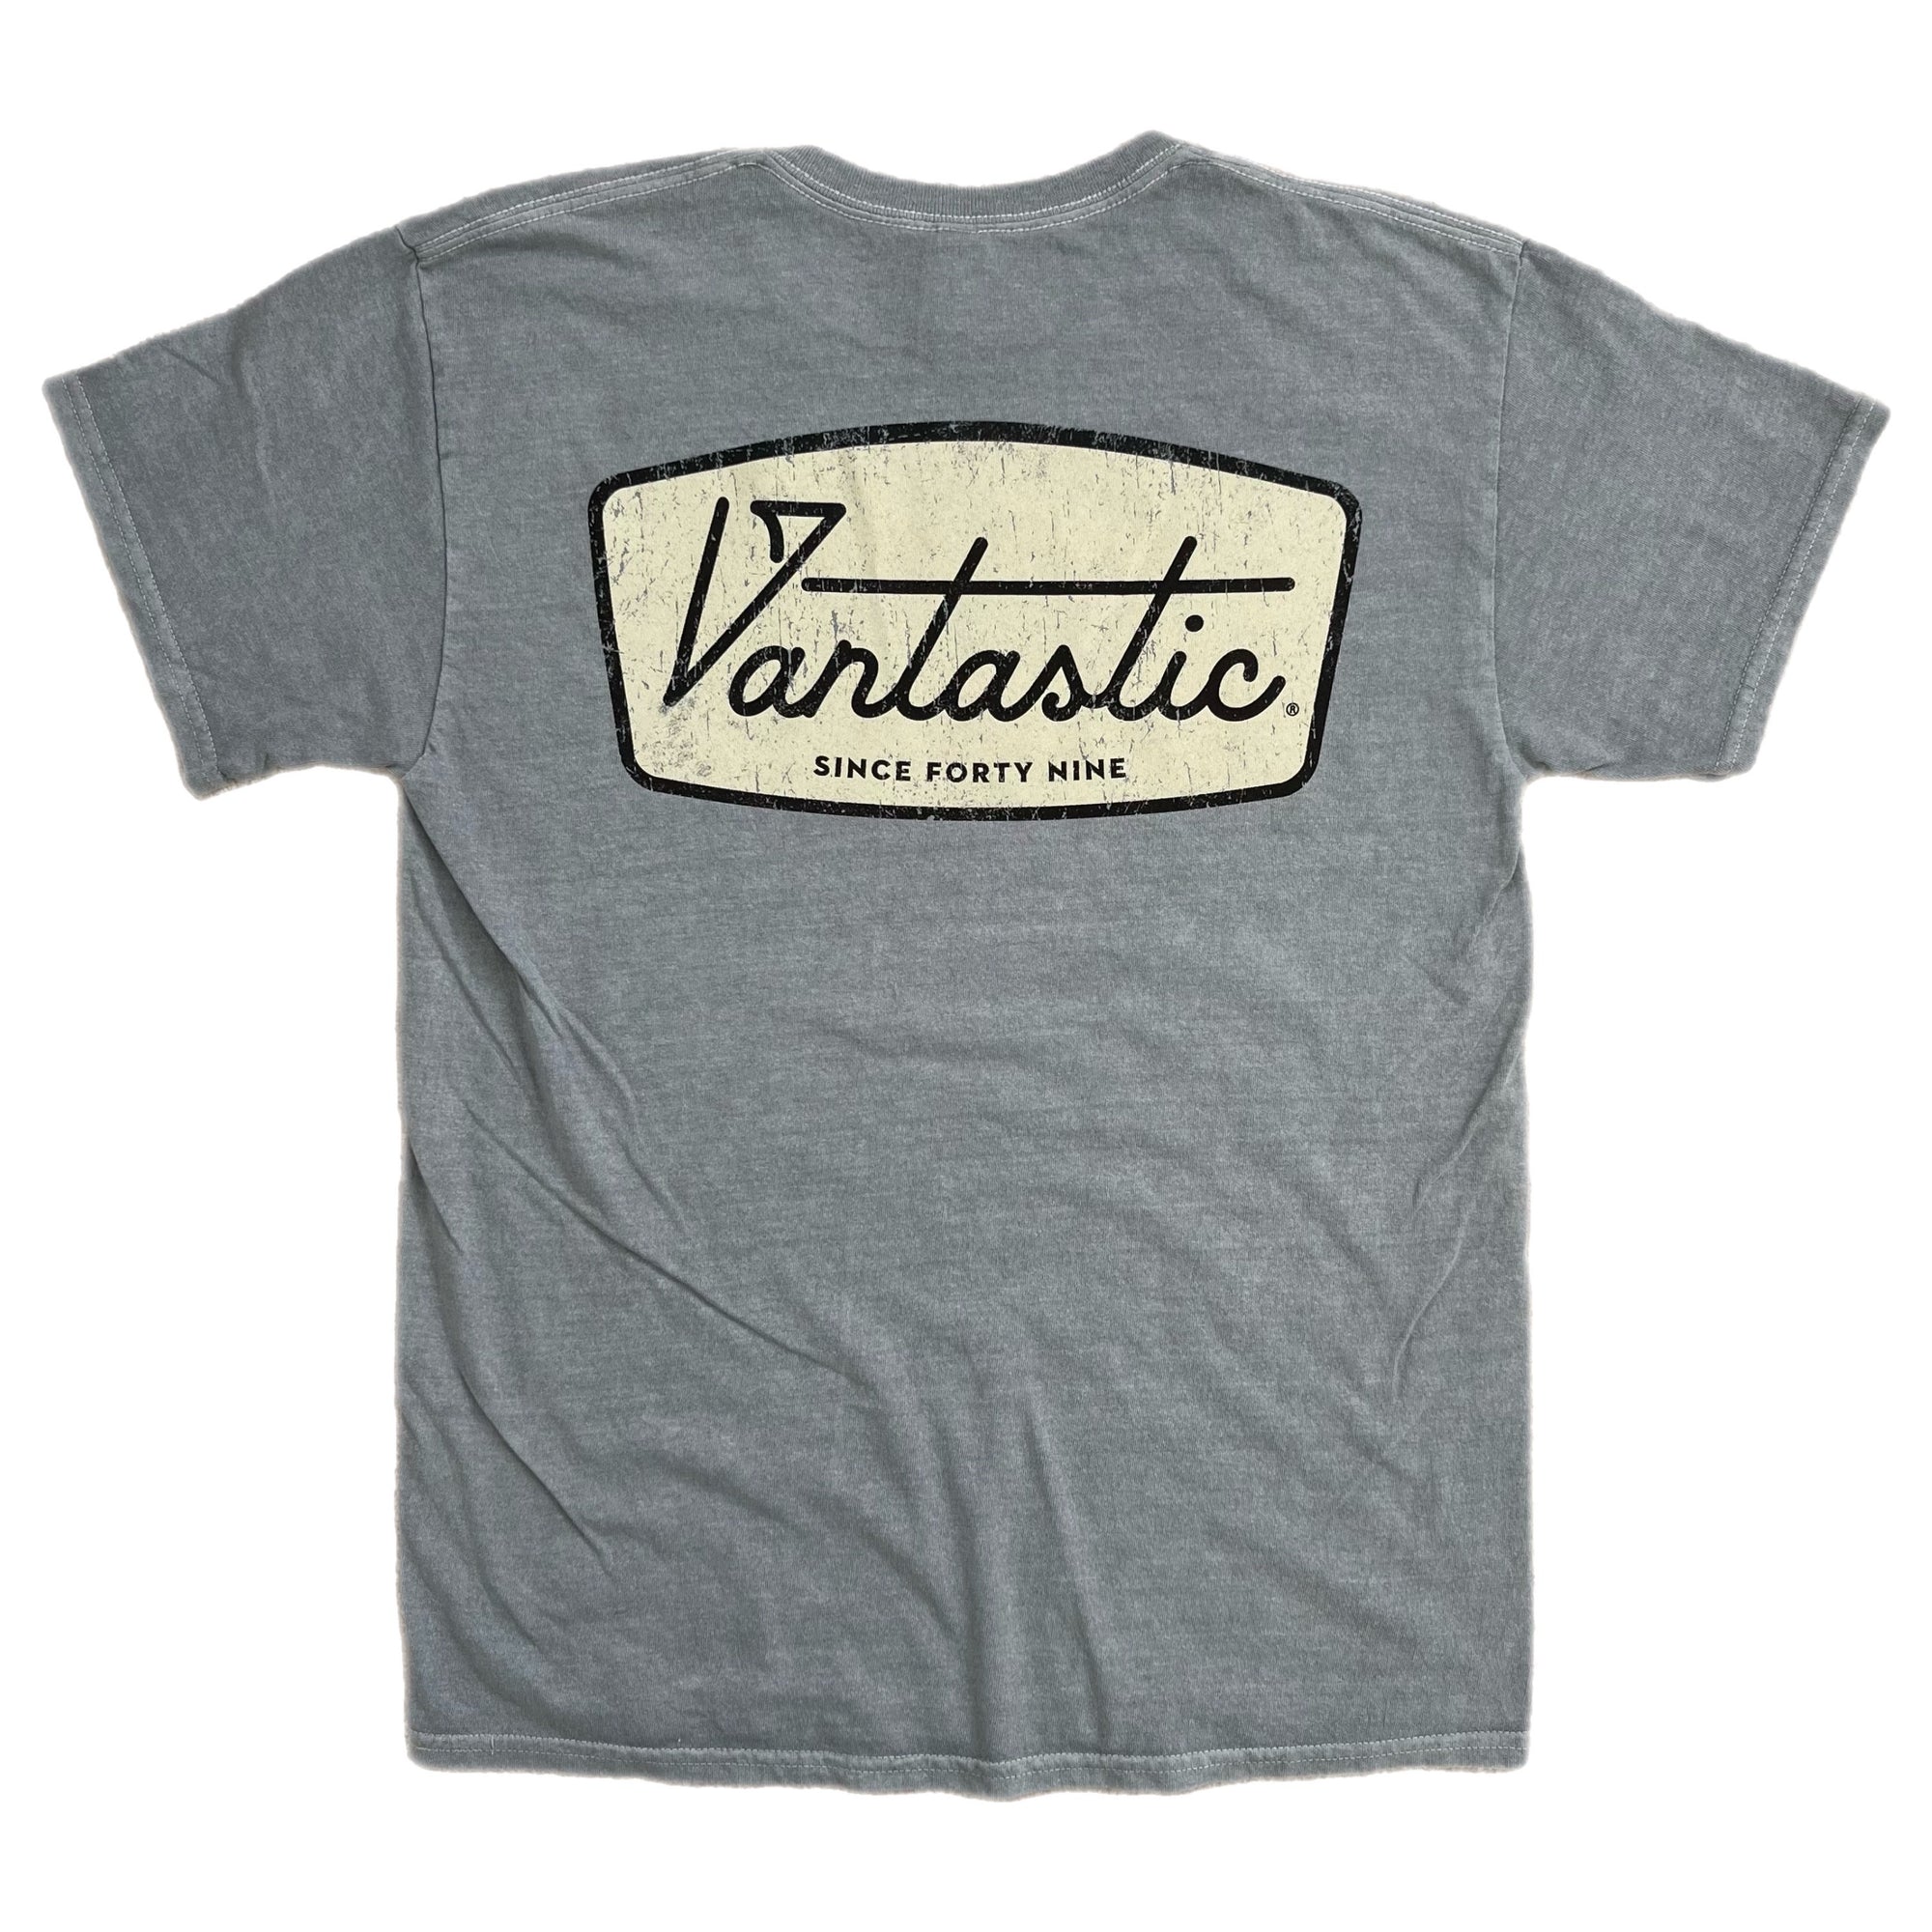 Vintage Deluxe T-shirt - Washed Blue